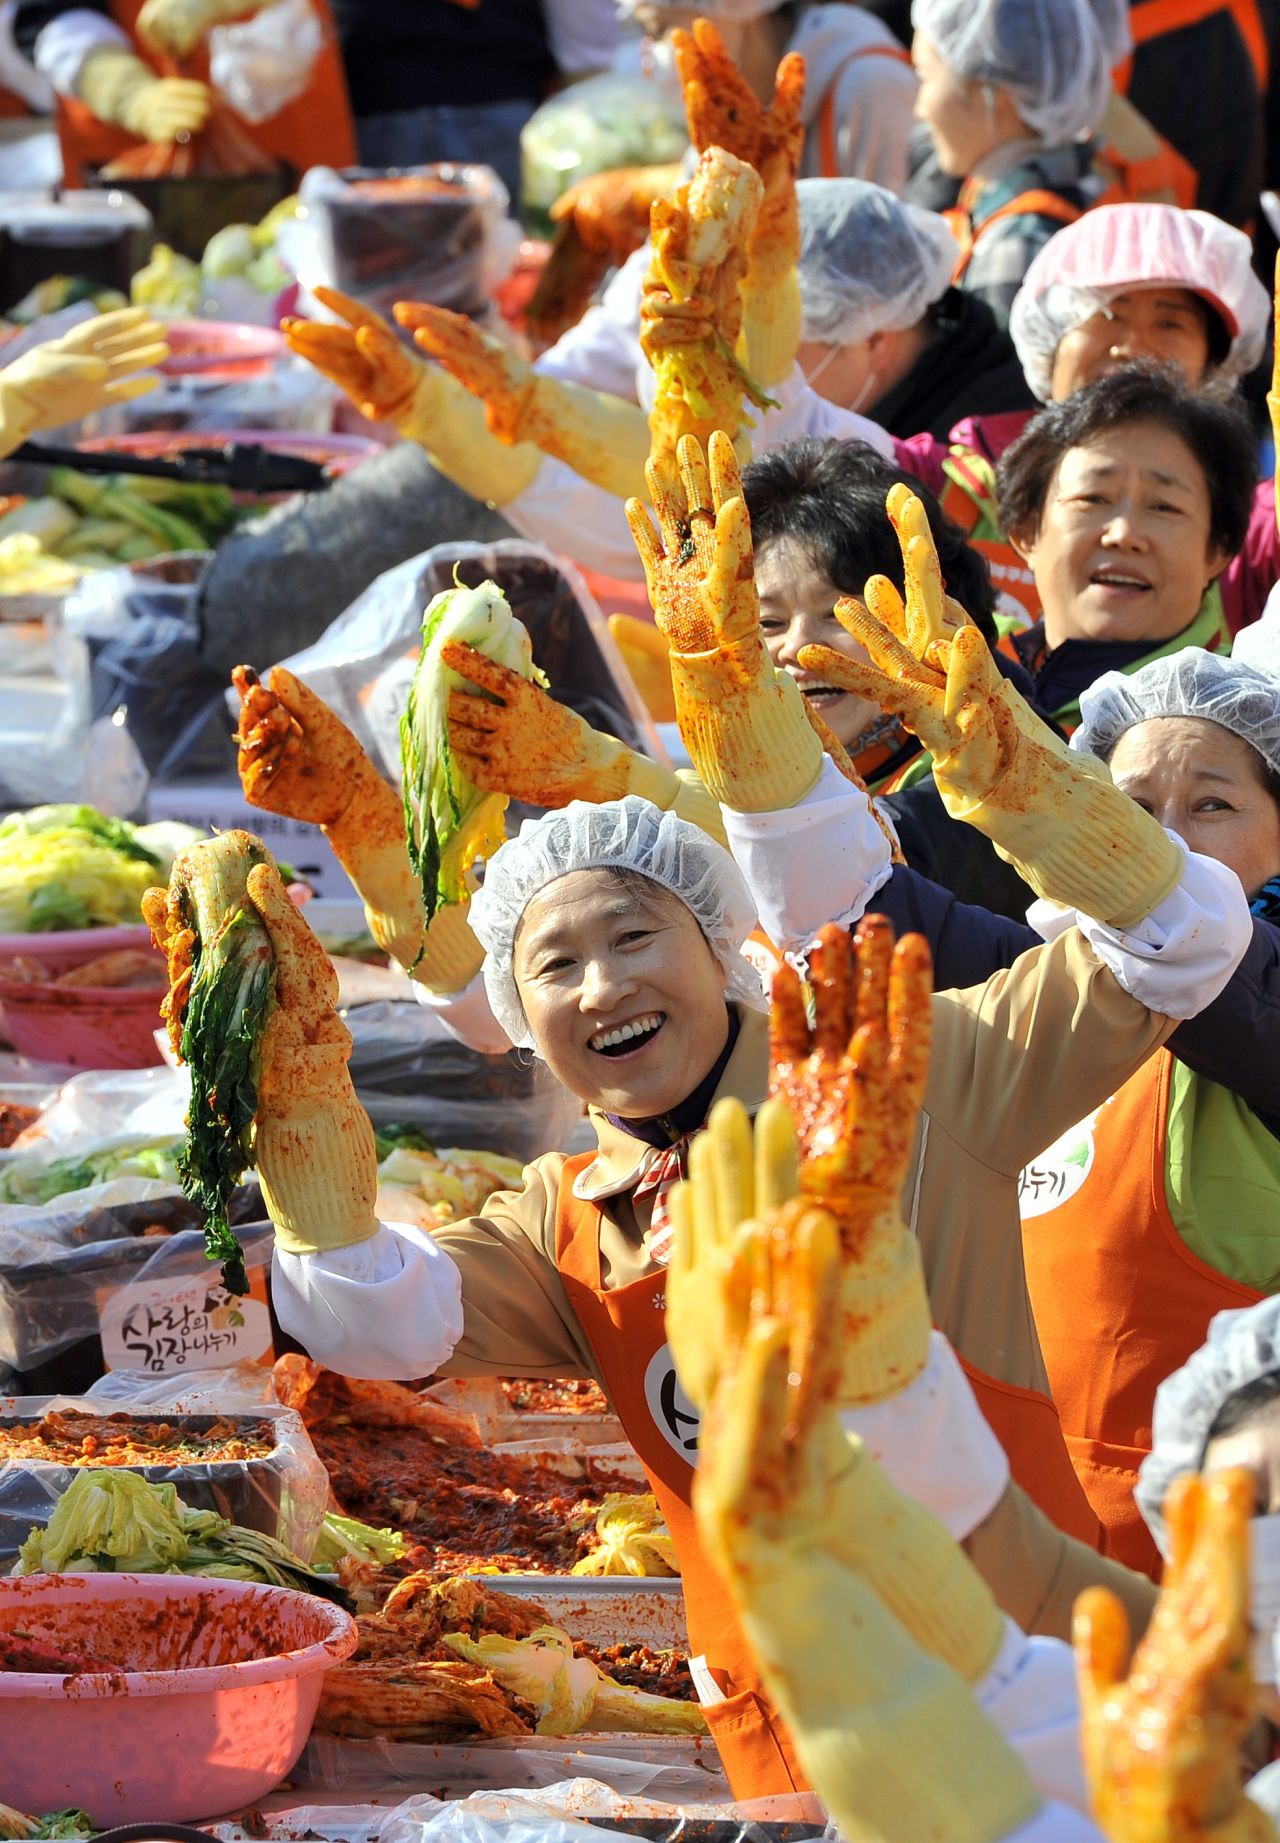 Given how complicated the process is, more and more households in South Korea are opting to buy pre-made kimchi in stores. According to a survey by research institute Gallup Korea last month, 67% of Korean households are making their own kimchi, compared to 95% of households in 1994. 